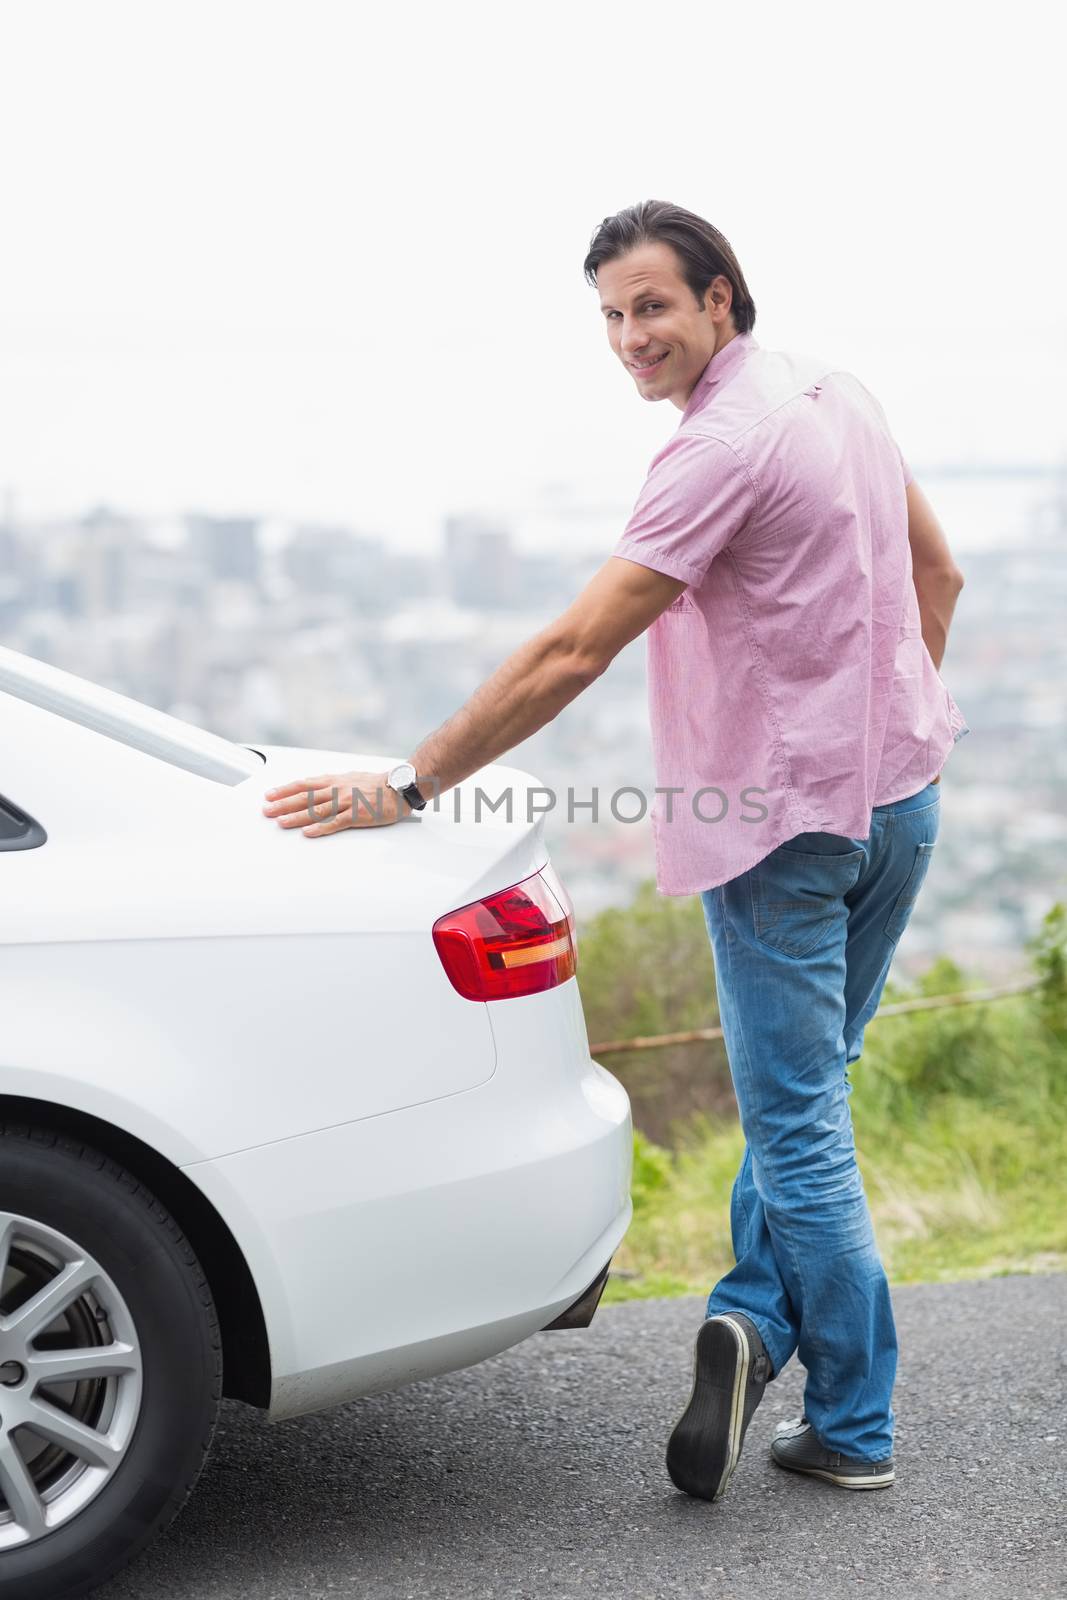 Smiling man standing next to his car at the side of the road